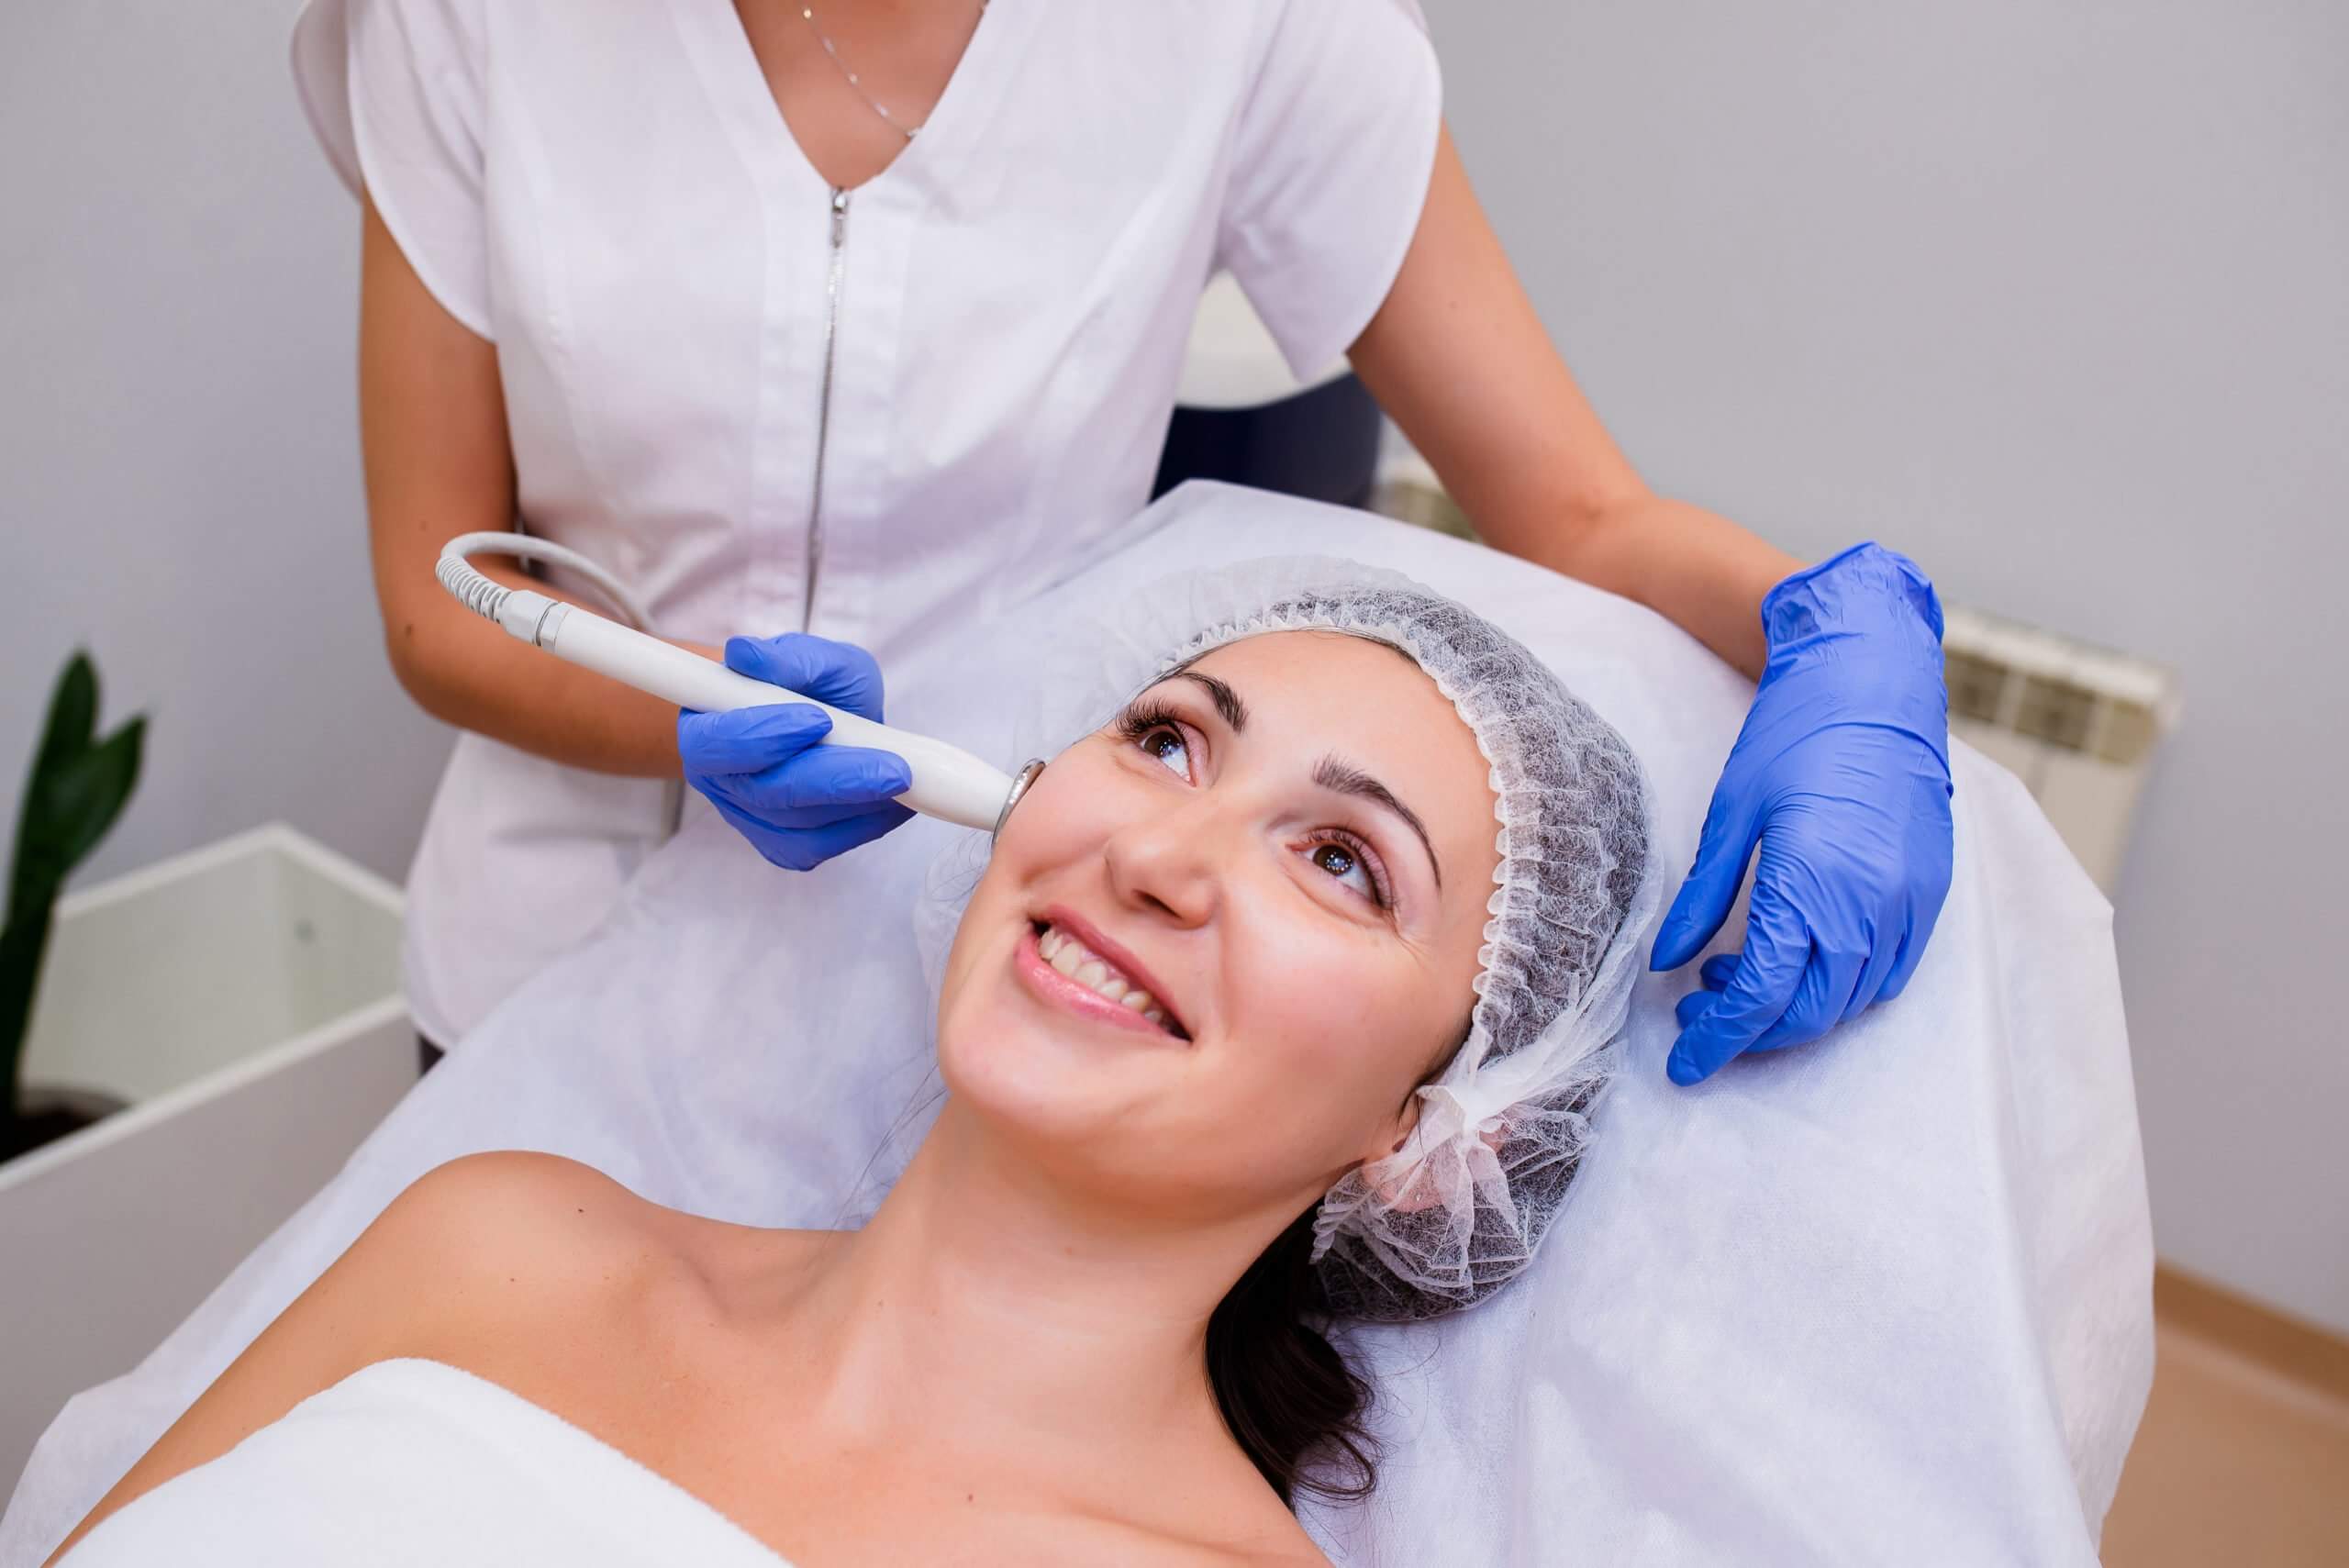 Young Happy Female Getting Hydrafacial Treatment | Glow Wellness Care in East Northport, NY